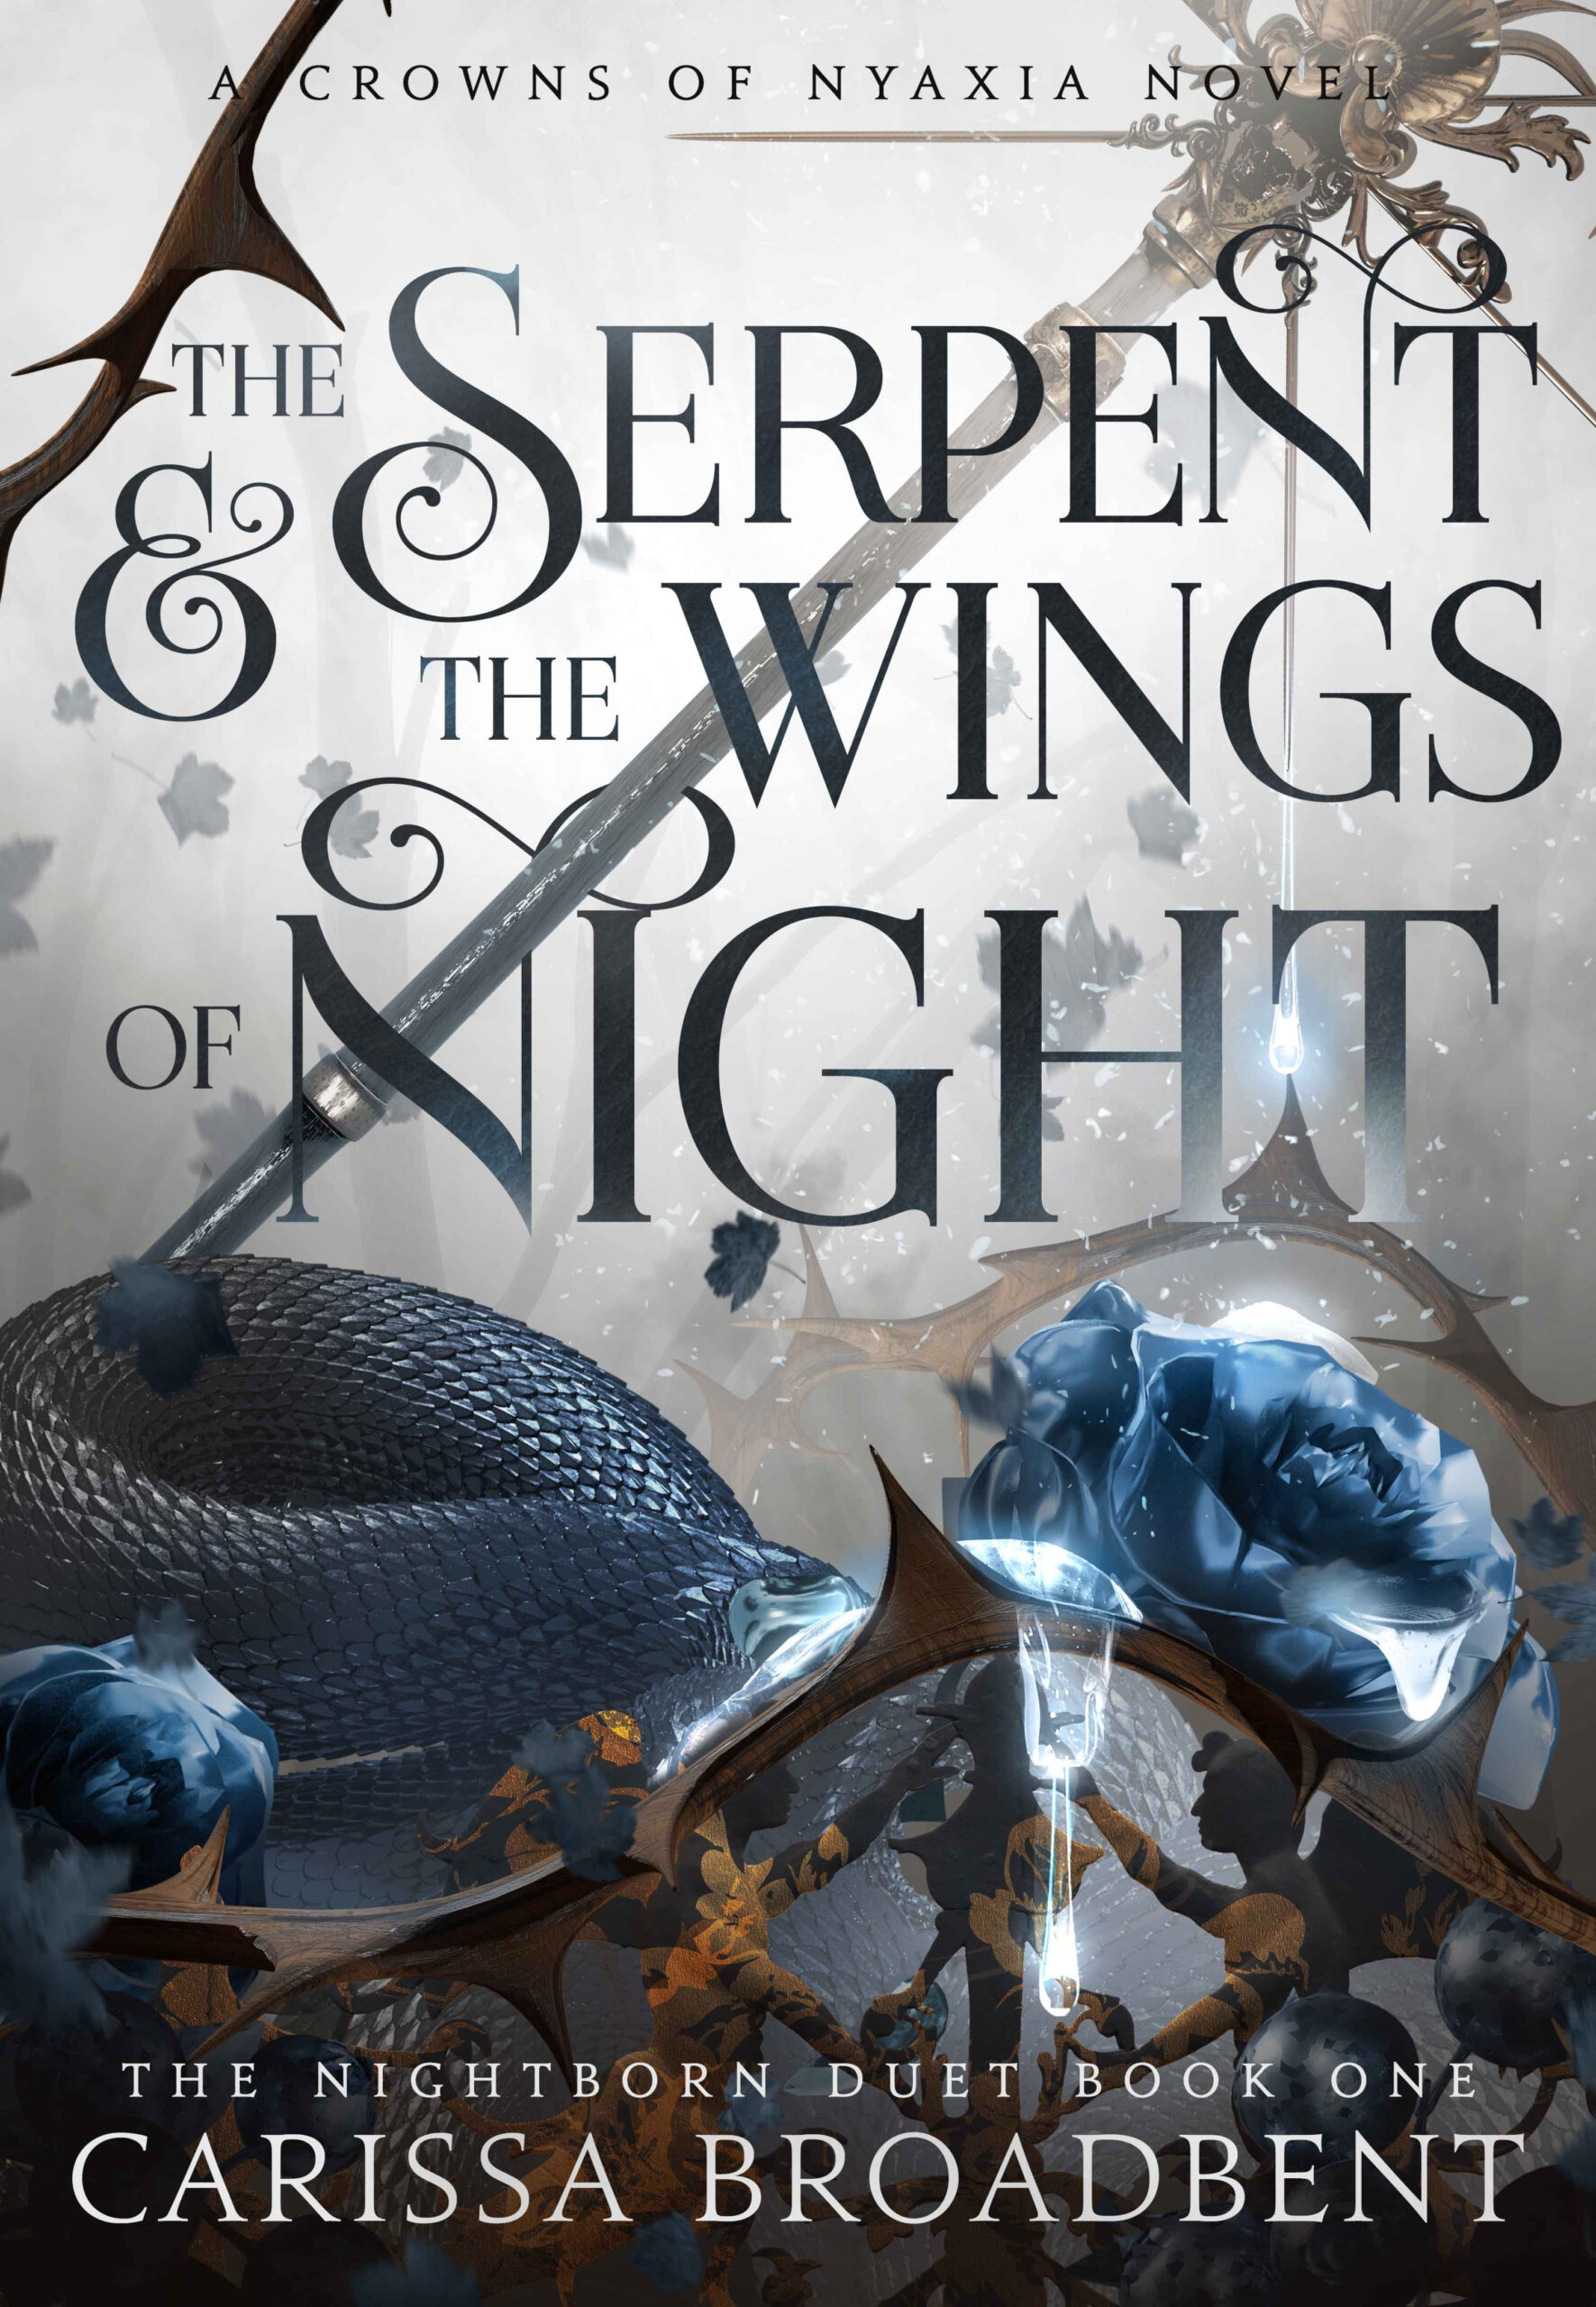 The Serpent and the Wings of Night by Carissa Broadbent  Goodreads